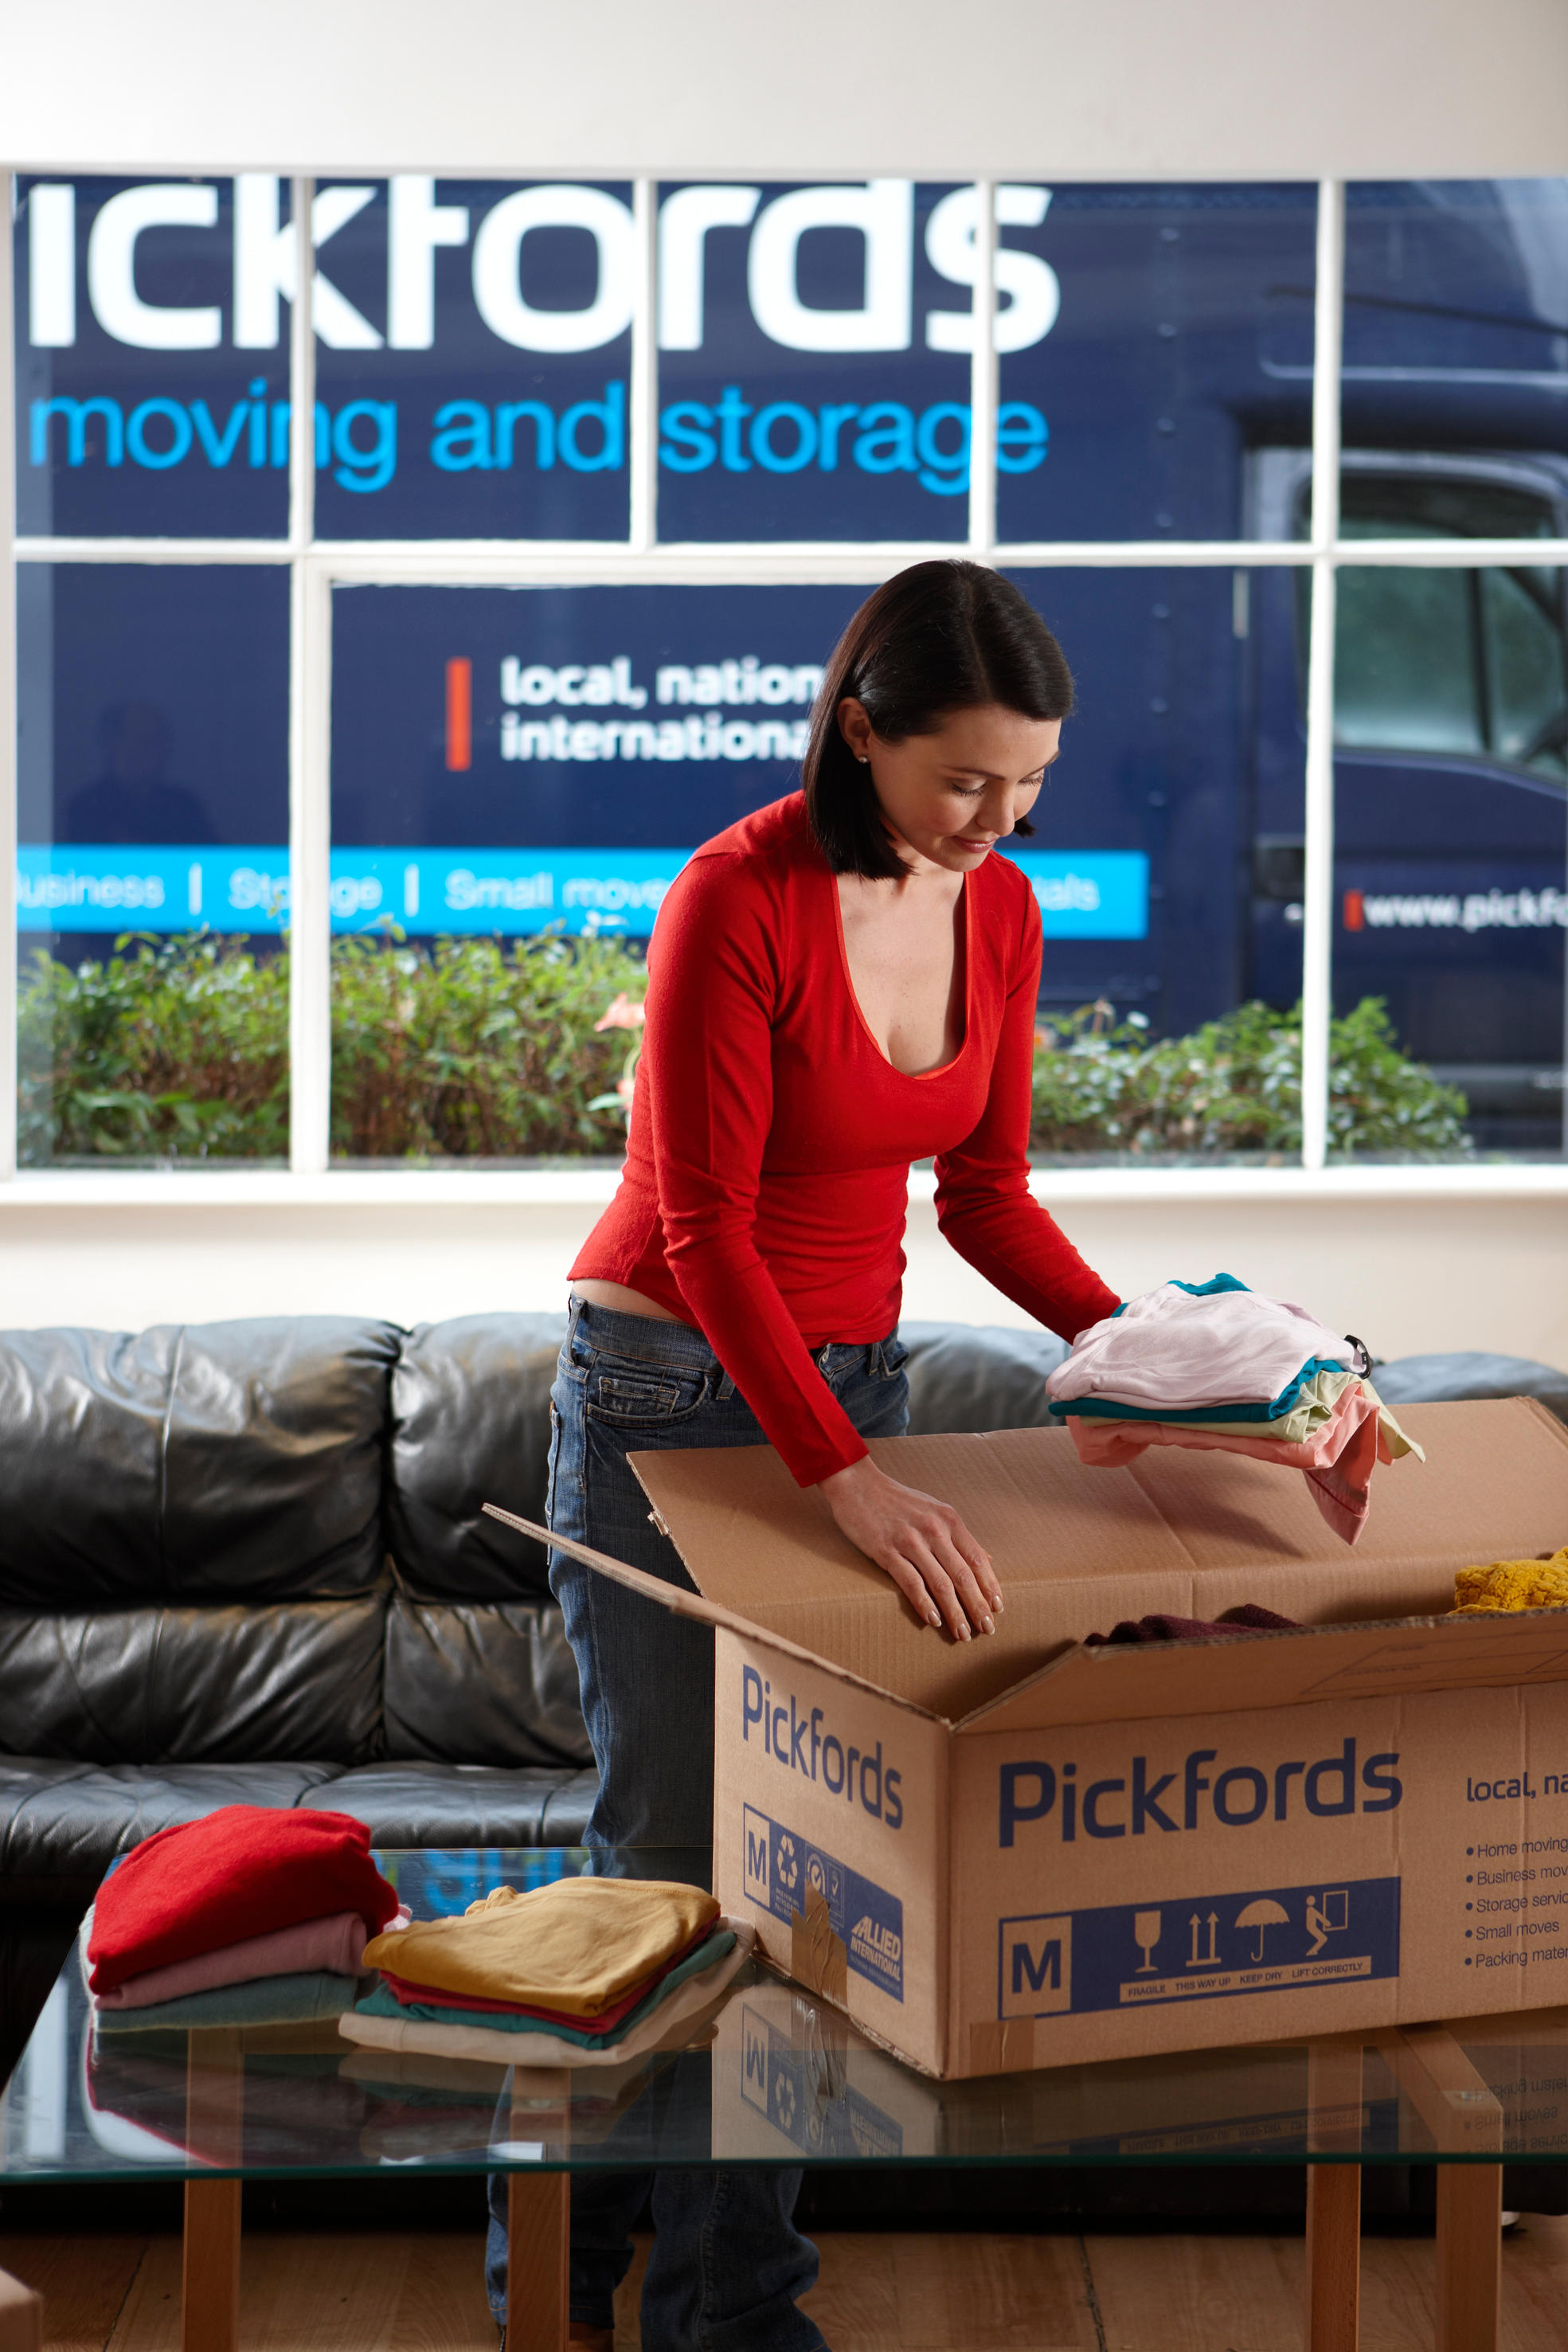 Images Pickfords Moving and Storage